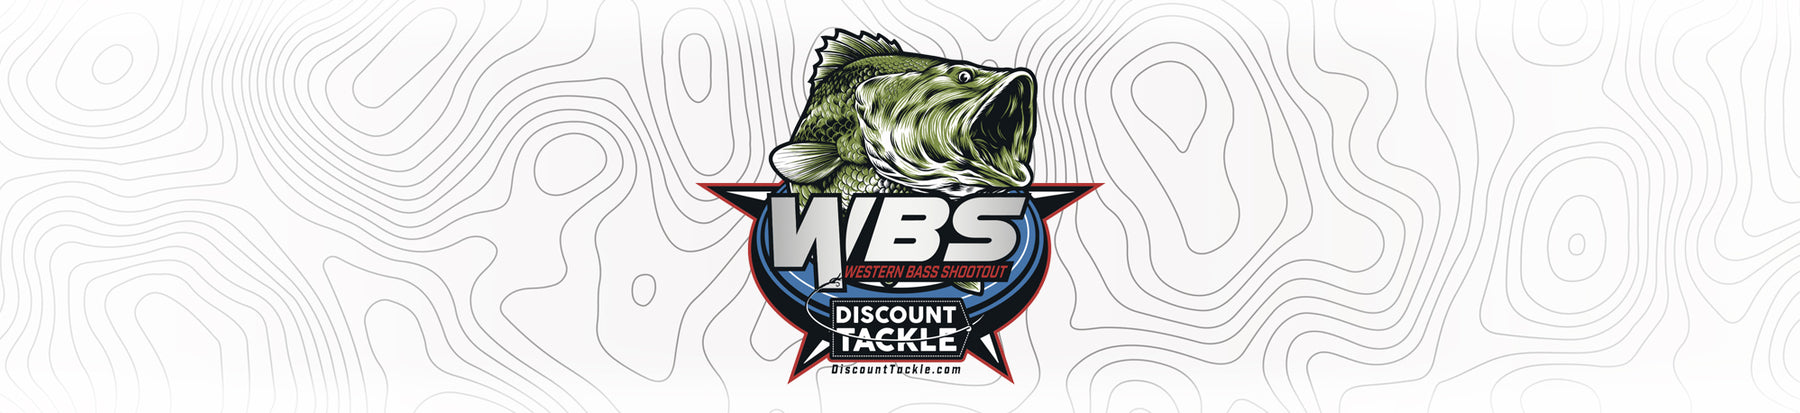 DiscountTackle.com Western Bass Shootout